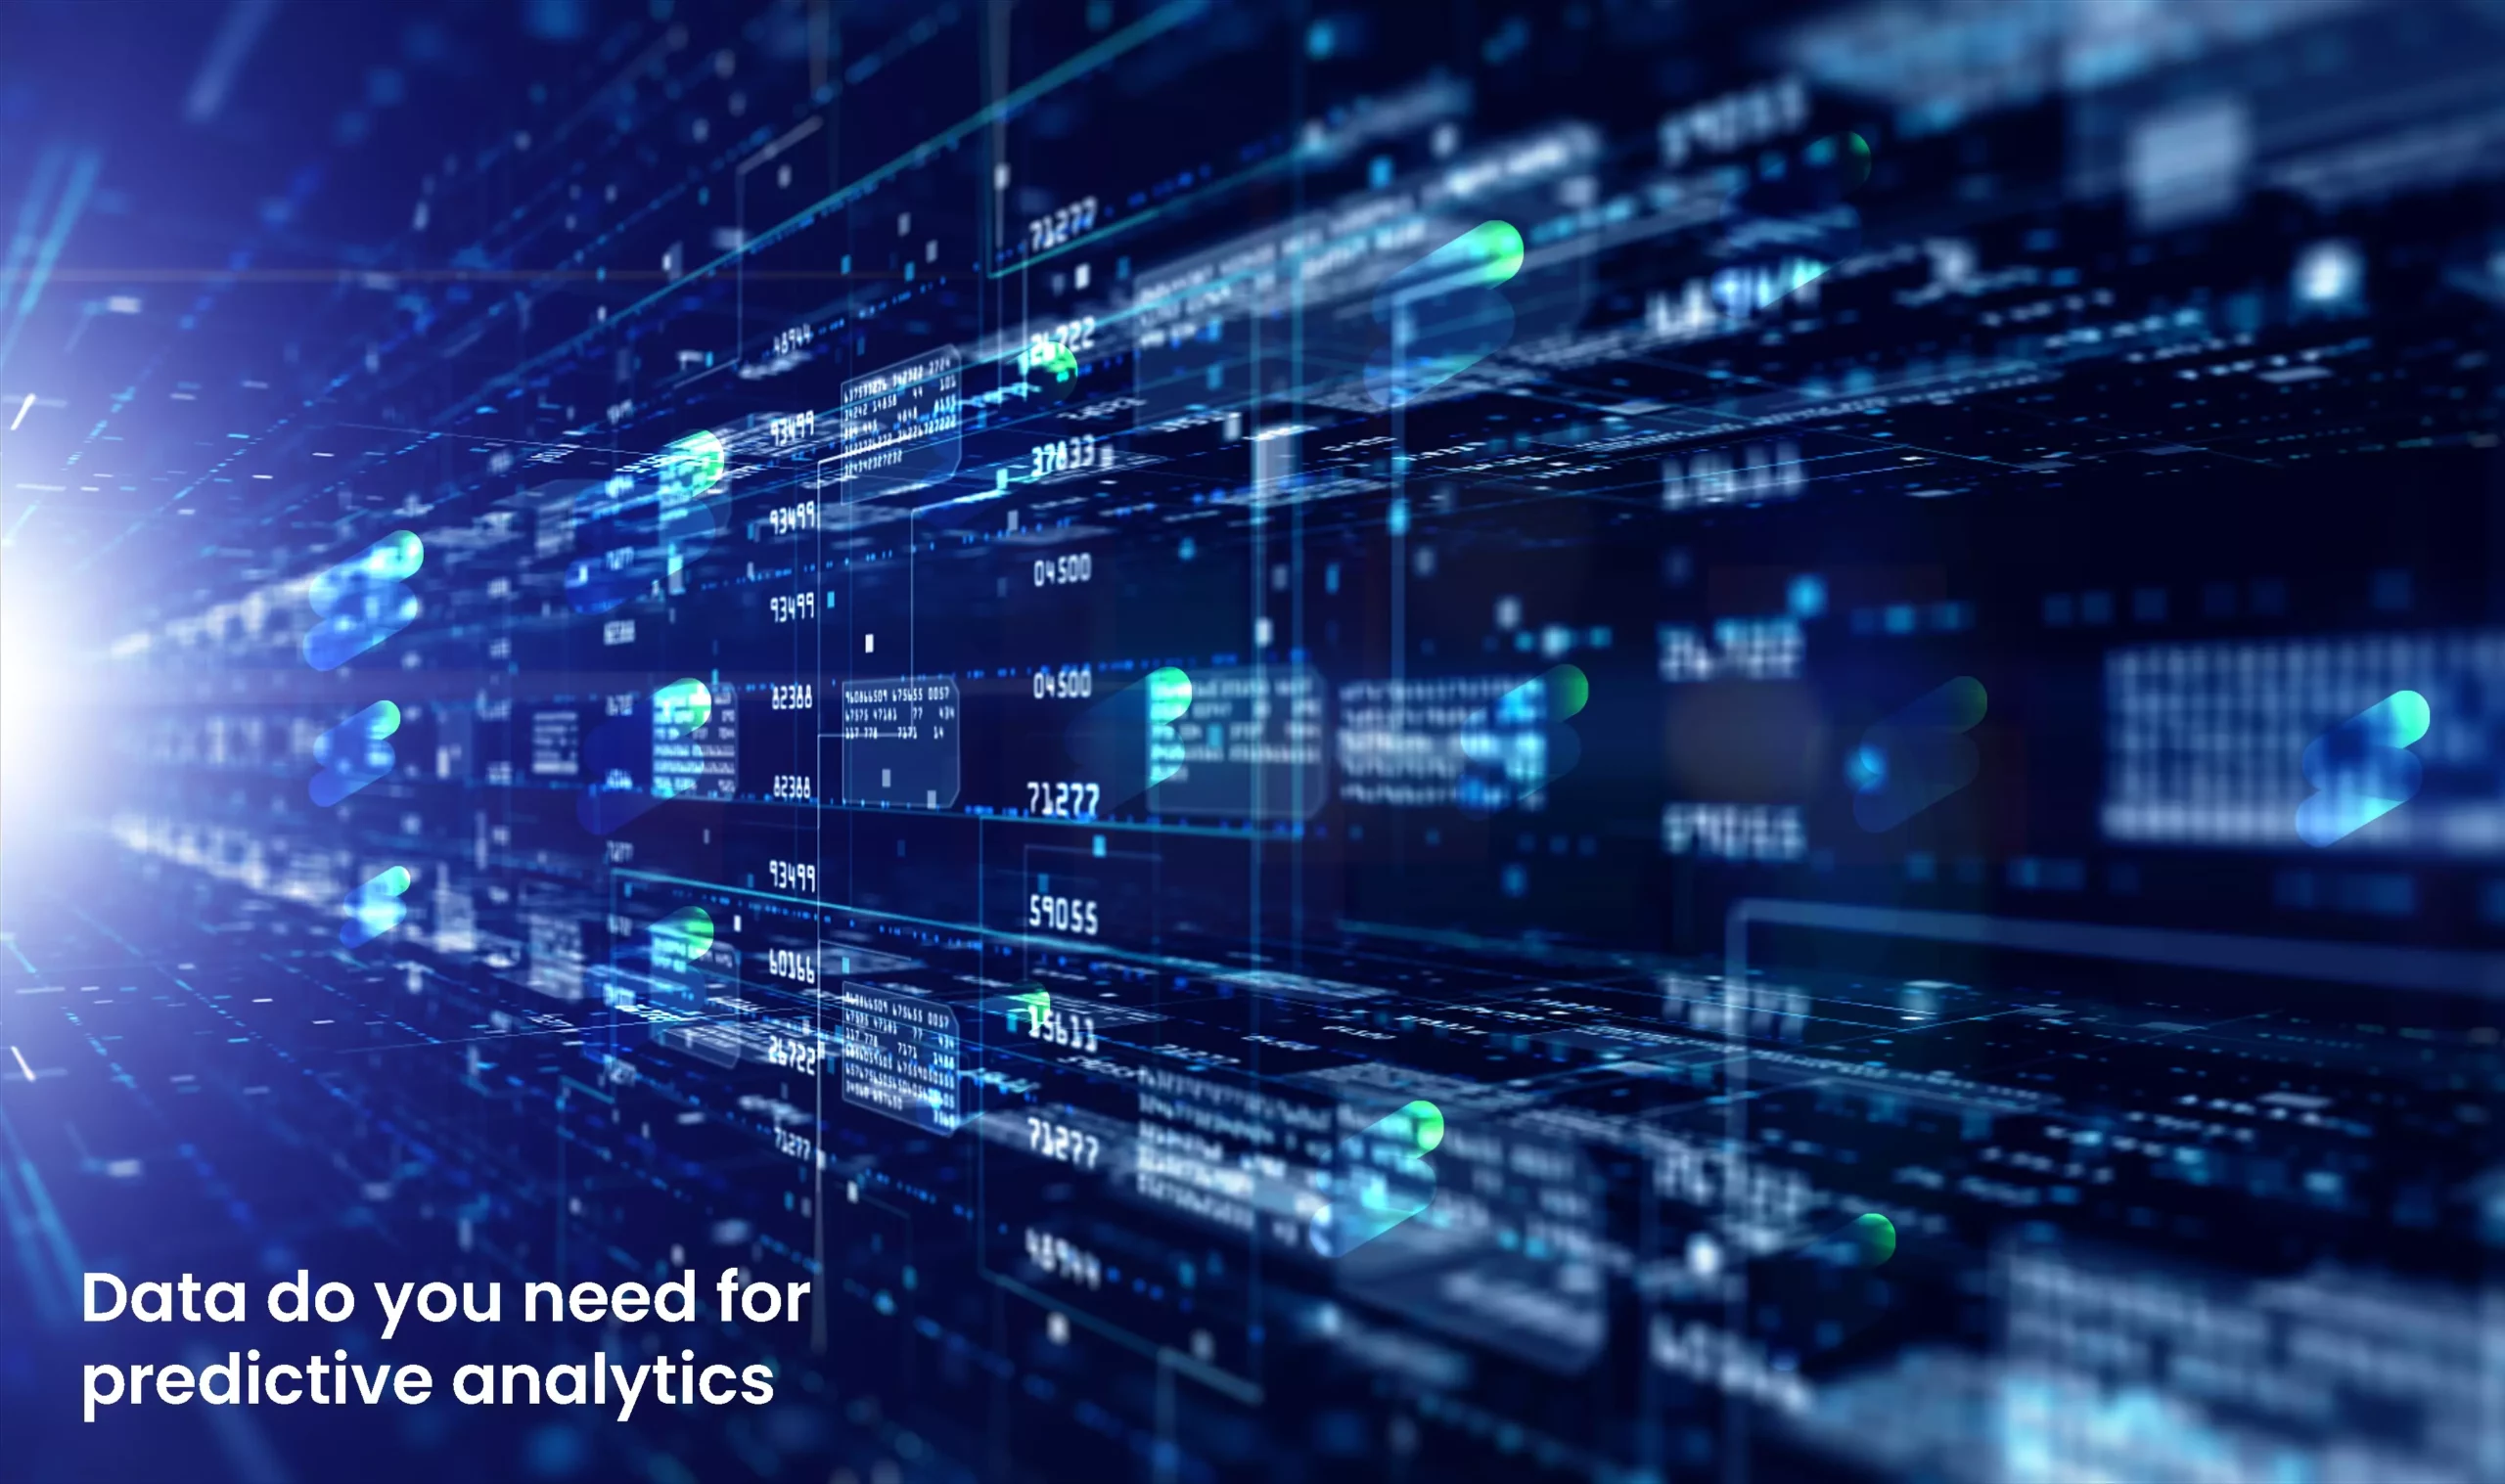 What data do you need for predictive analytics